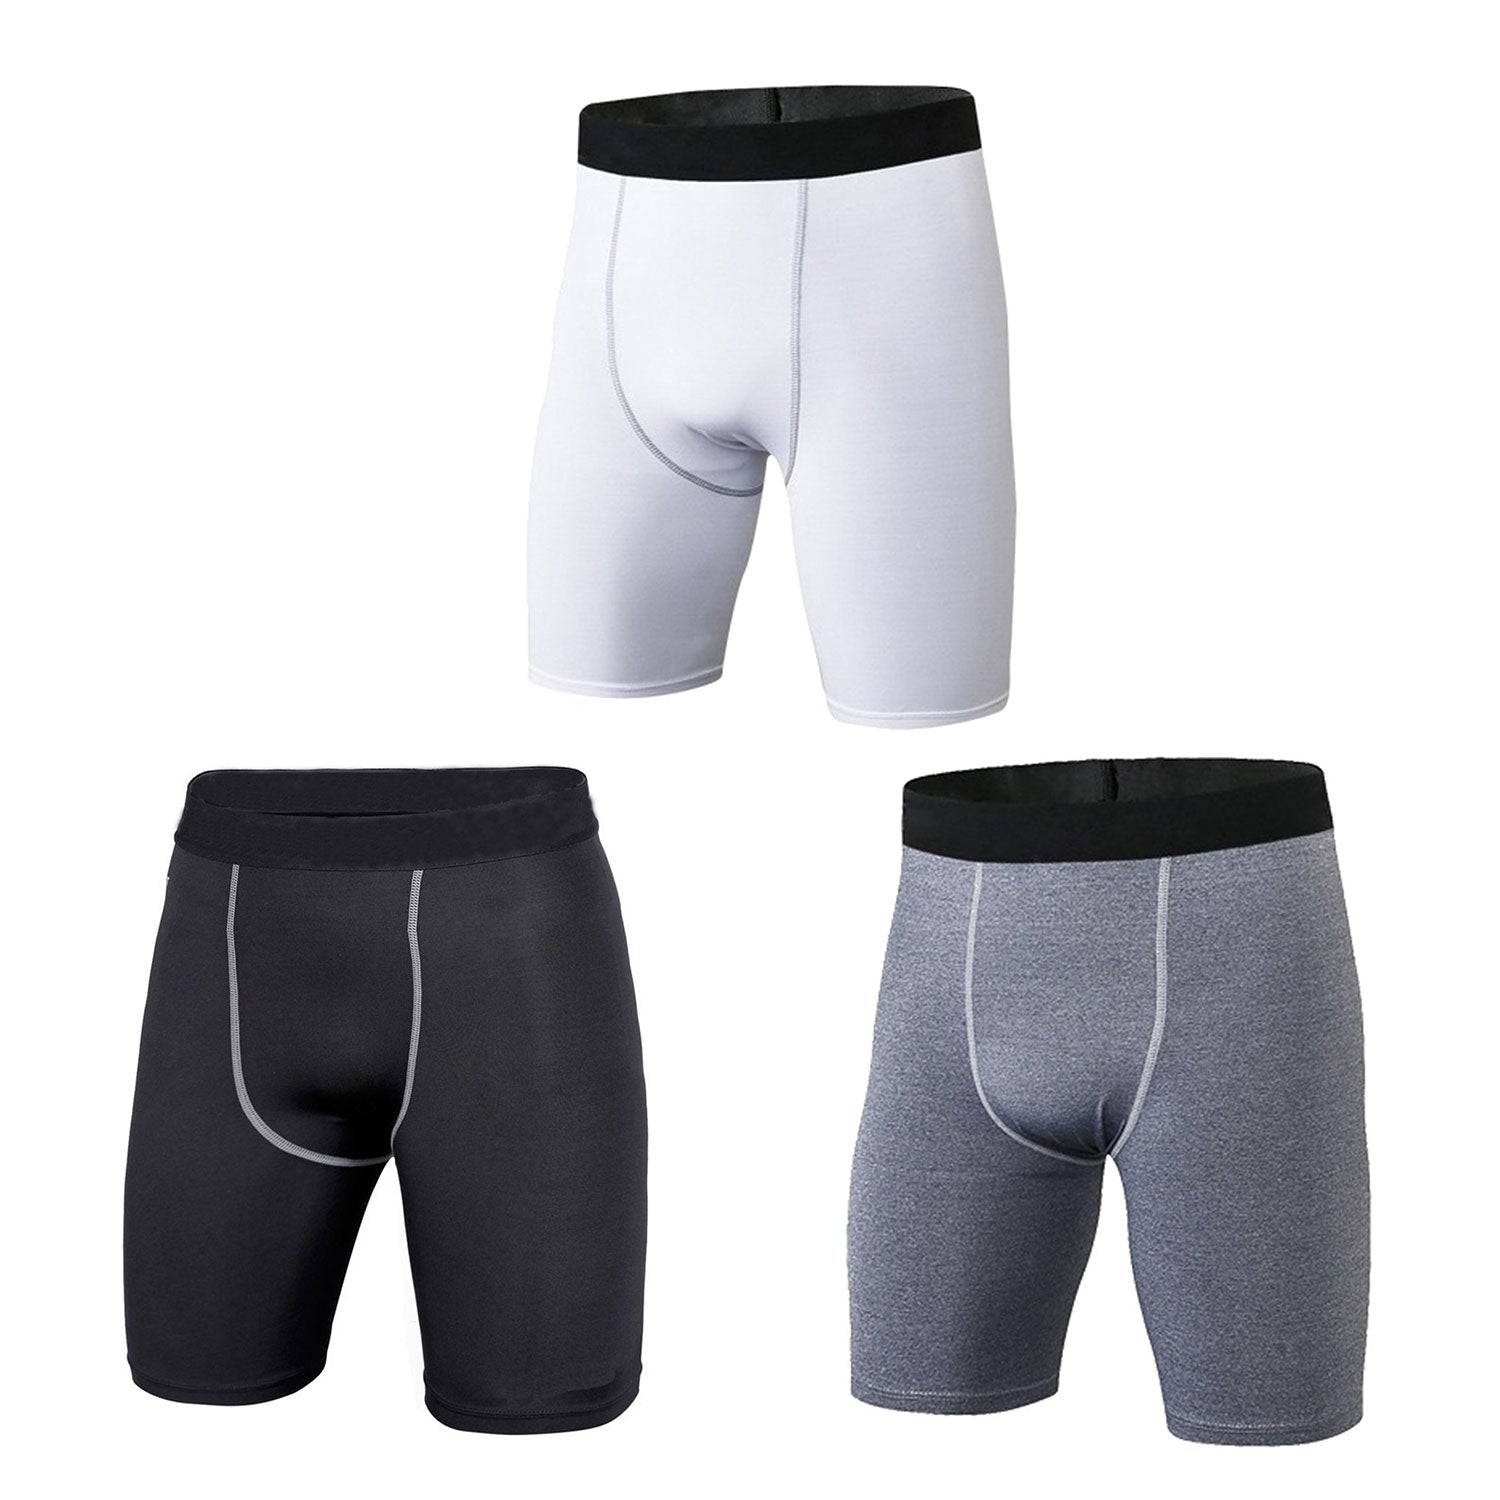 Men's Compression Shorts Cool Dry Active Sports Tights Baselayer